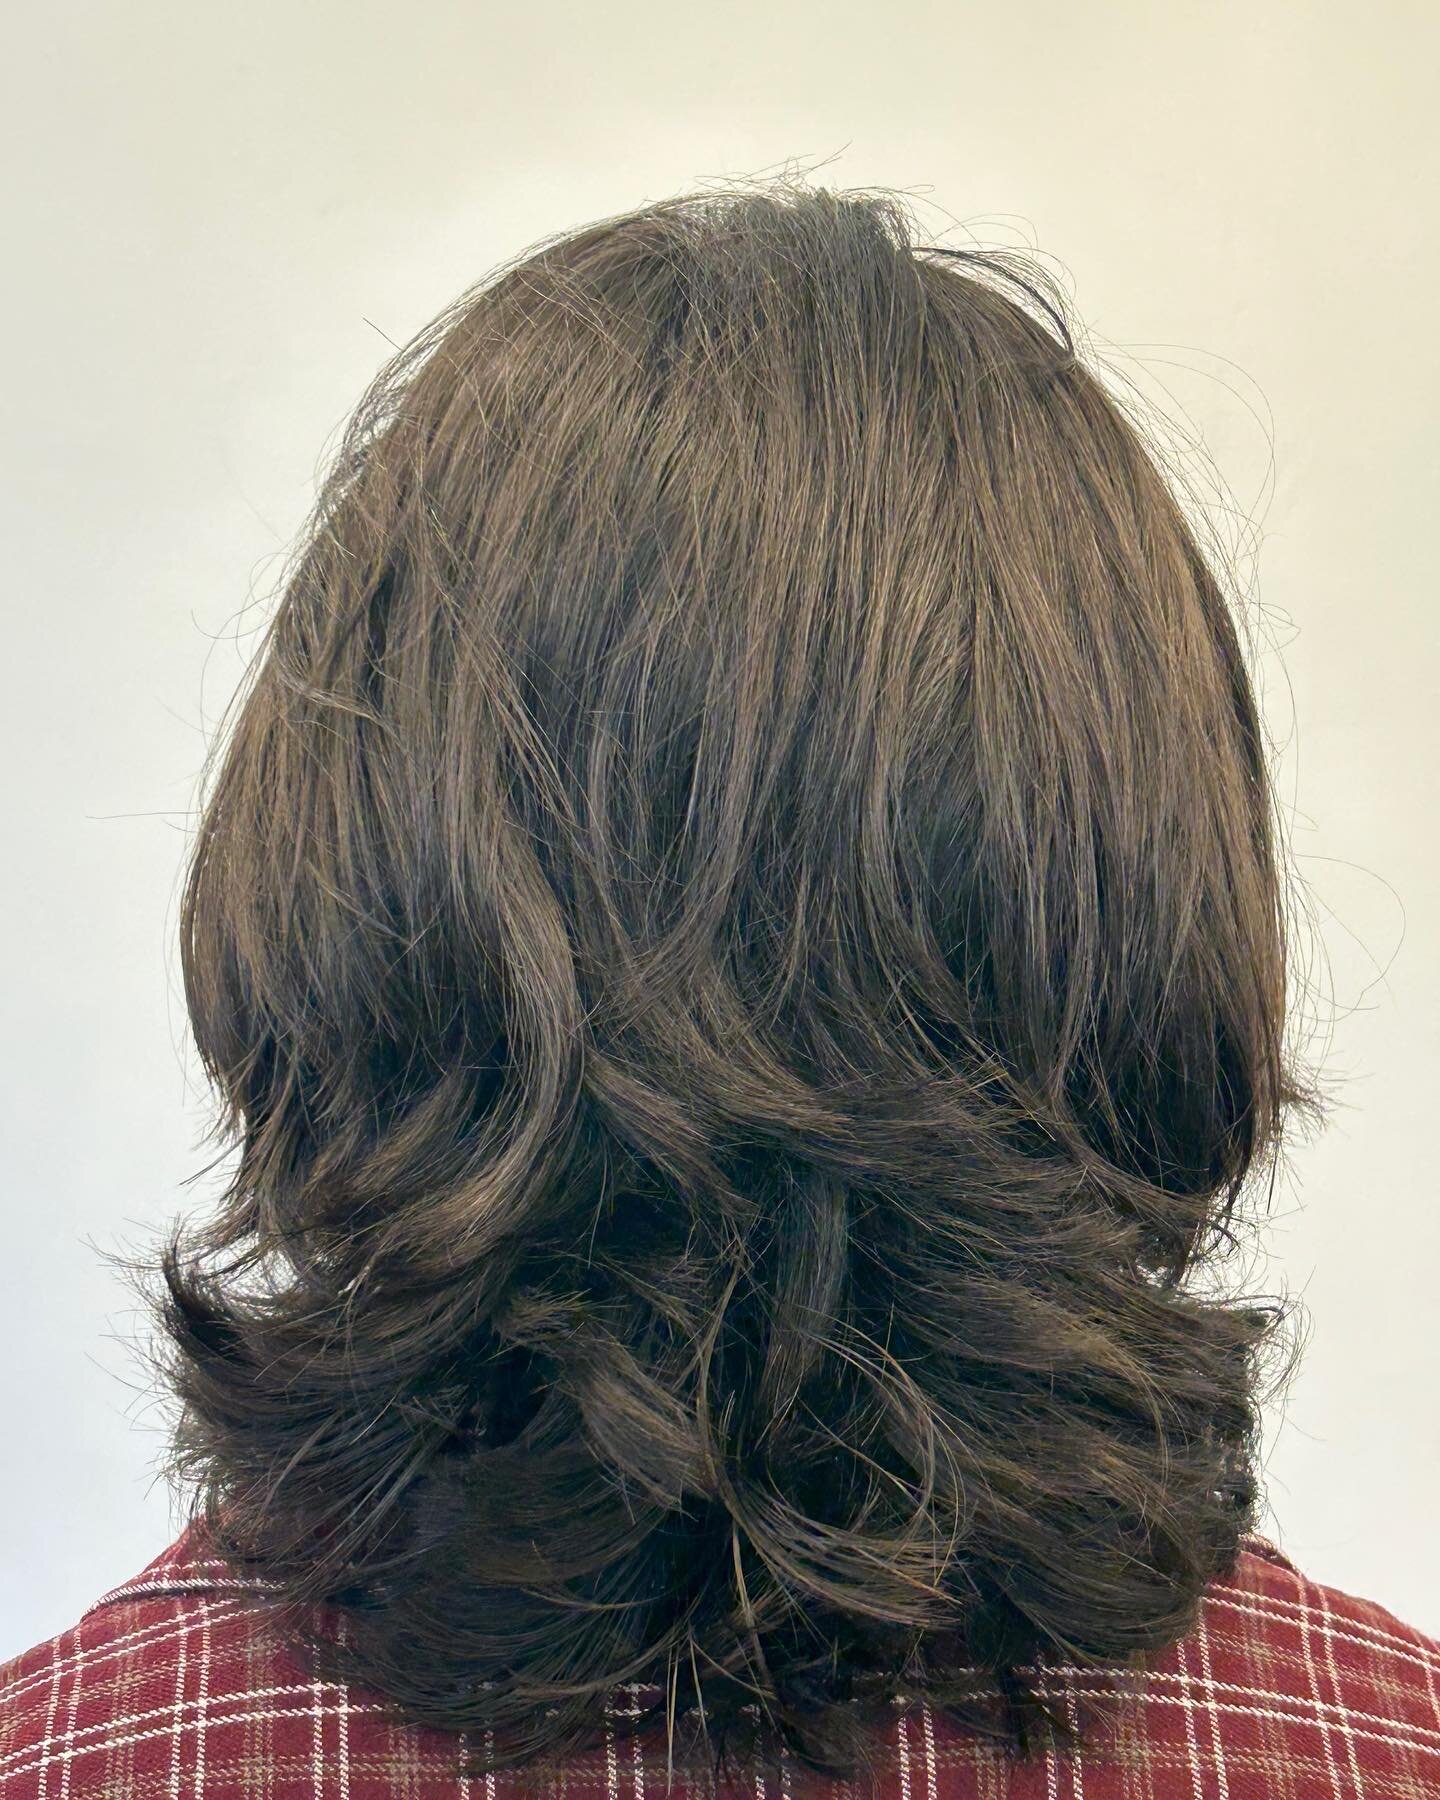 🌿REFRESHED🌿
Taking off a little length and adding movement can bring your hair to life and make your daily haircare routine much easier! 
&bull;
Haircut by Ricky @cuts_by_rickyb ✂️
&bull;
Schedule your appointments by calling or texting (860)999&bu